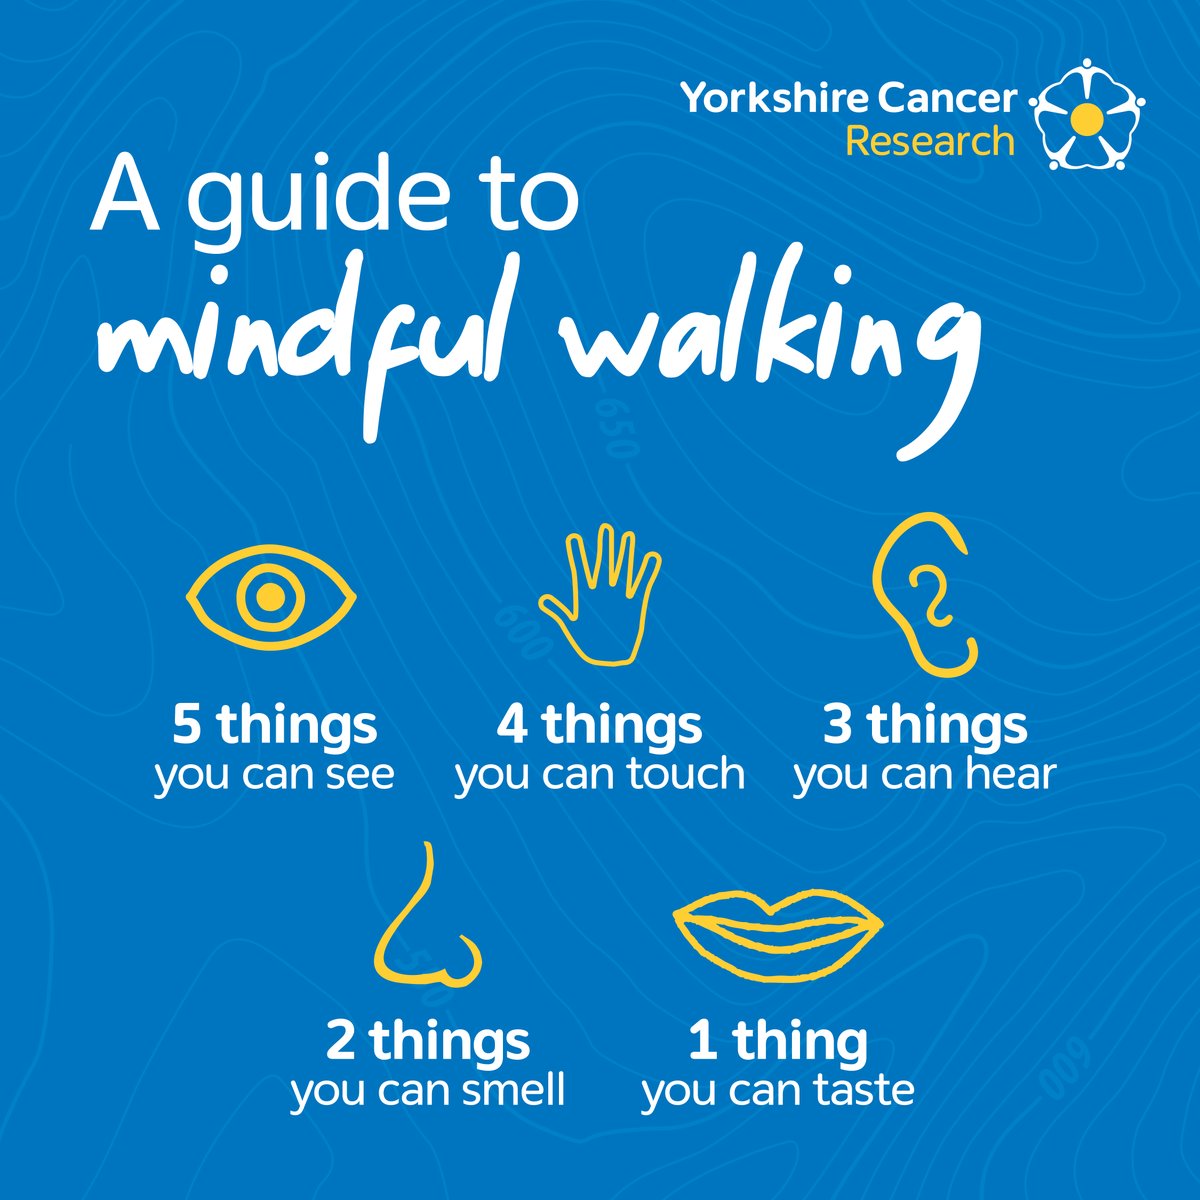 Your guide to mindful walking 🍃 As well as being good for your physical health, walking can also benefit your mental wellbeing. The next time you are clocking up the miles as part of We Walk For Yorkshire, take a look at these mindfulness tips.